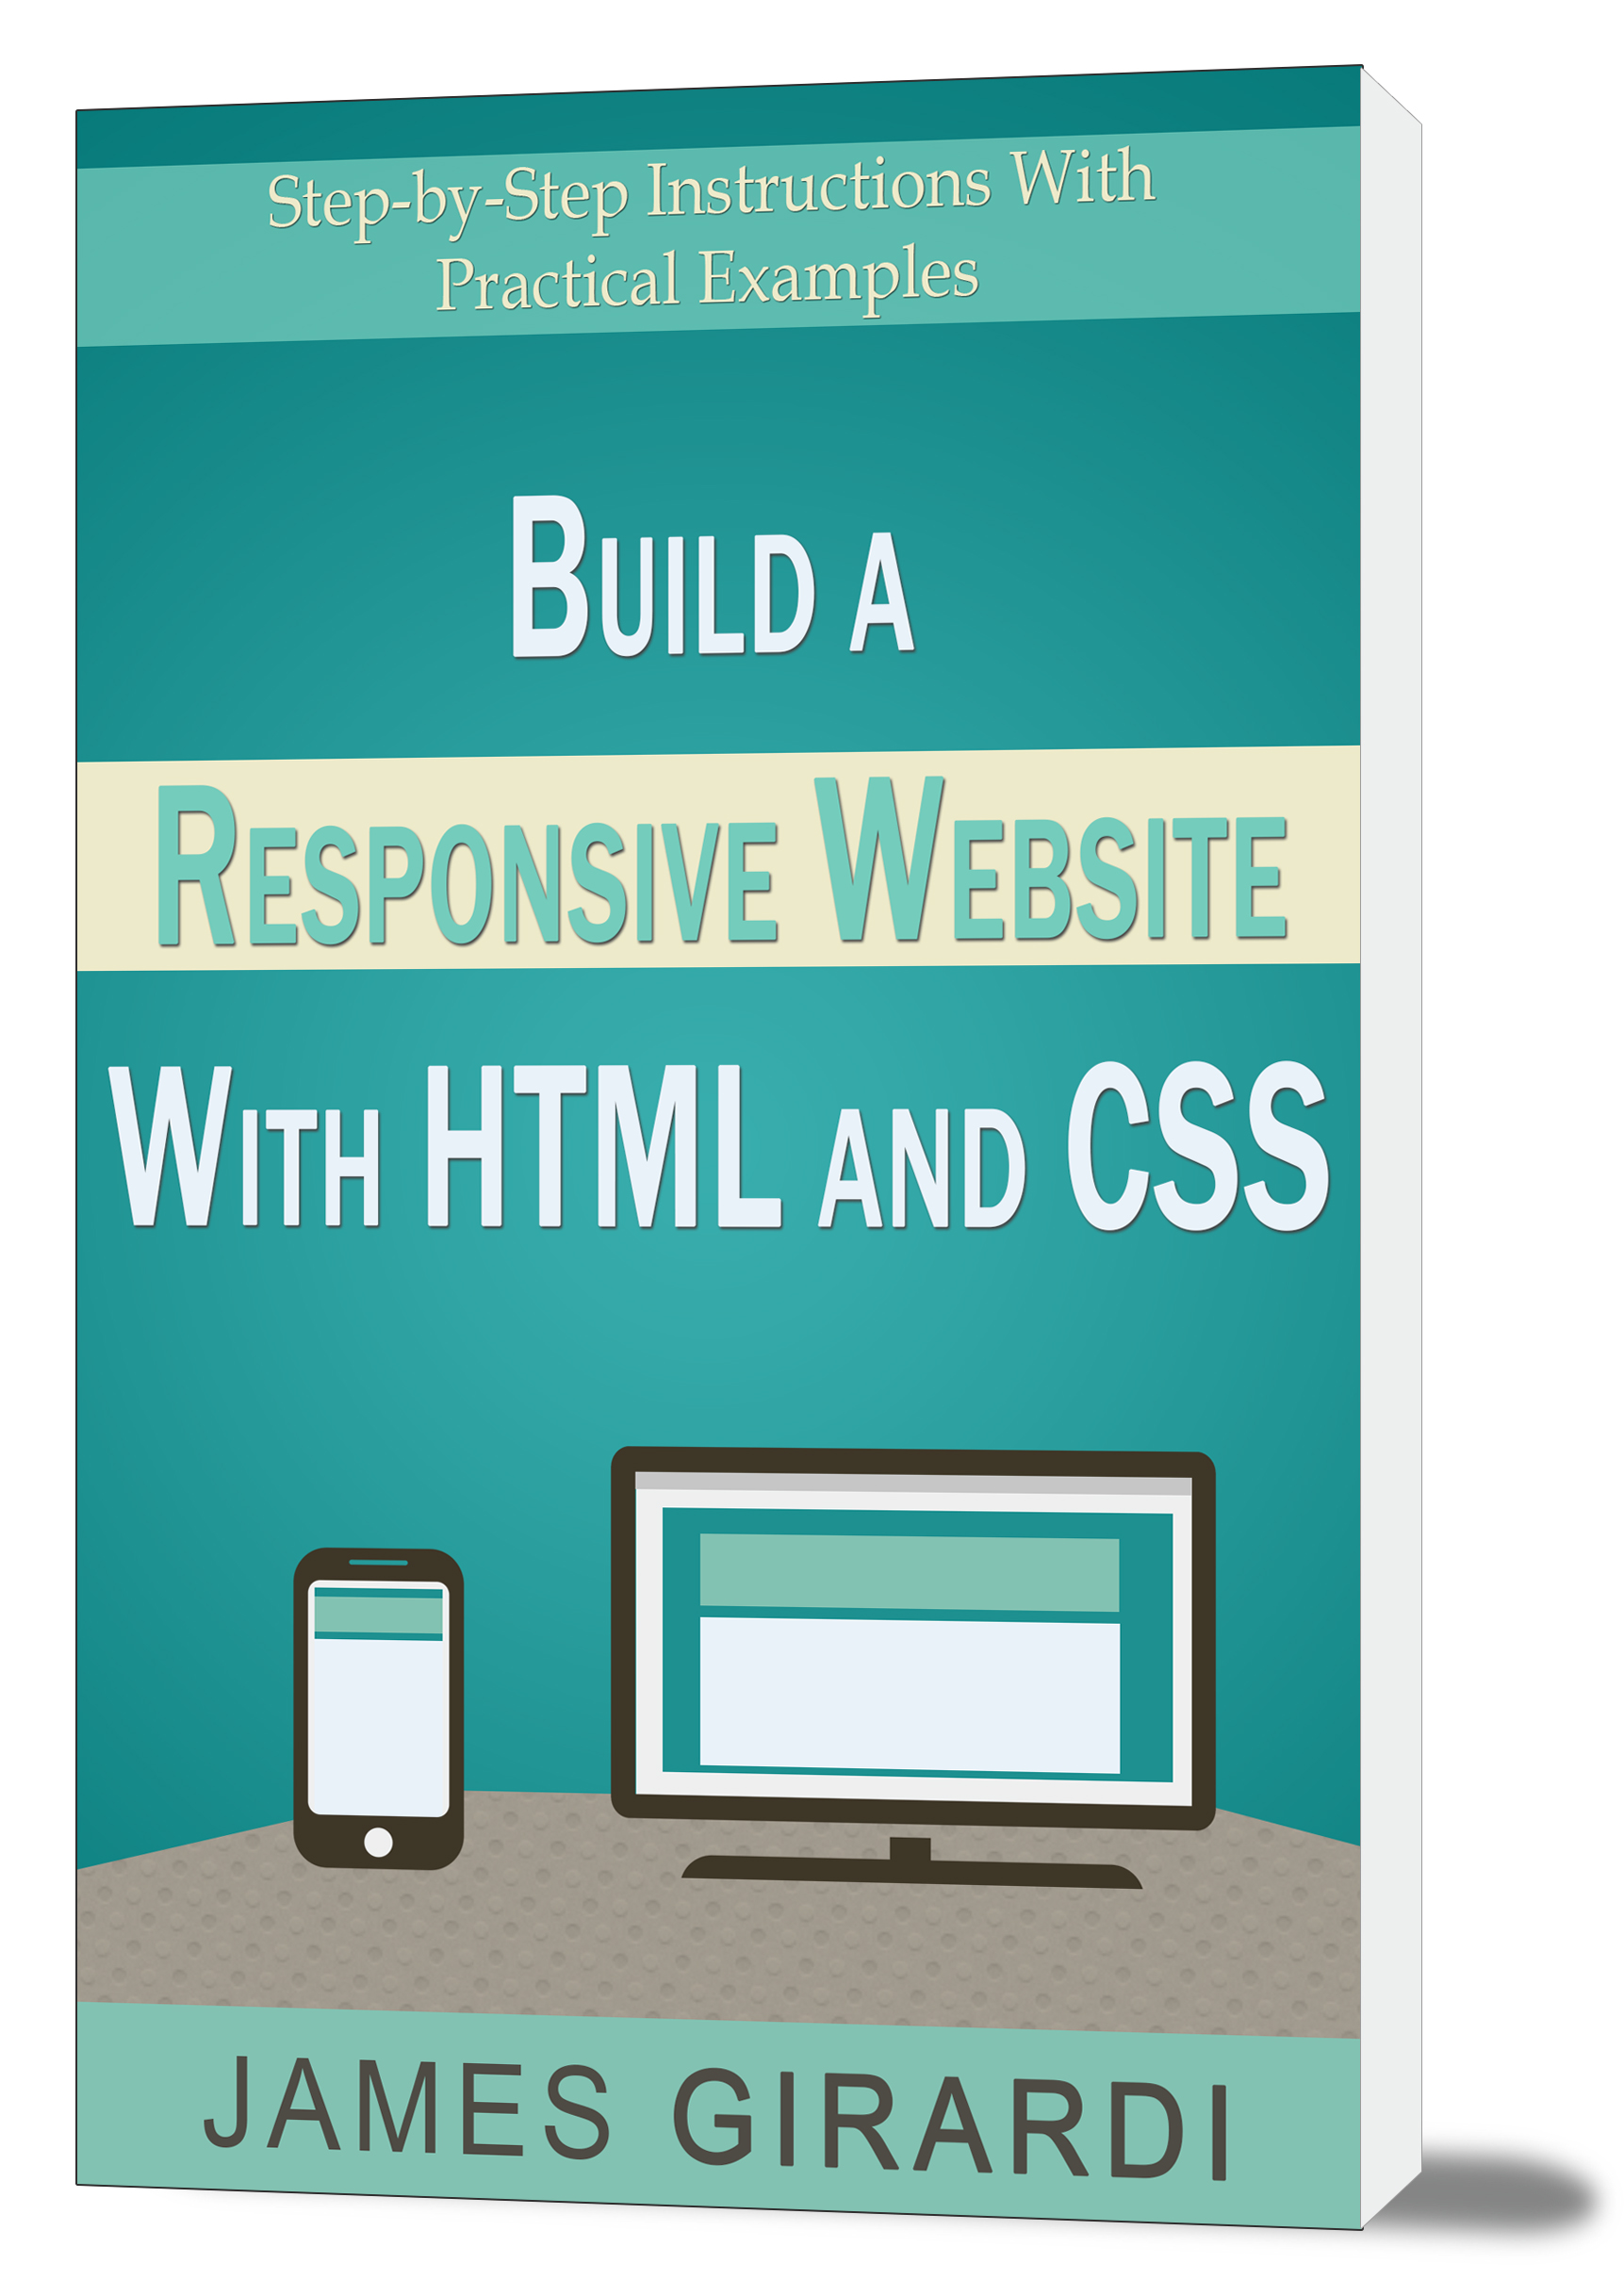 Build a Responsive Website with HTML and CSS